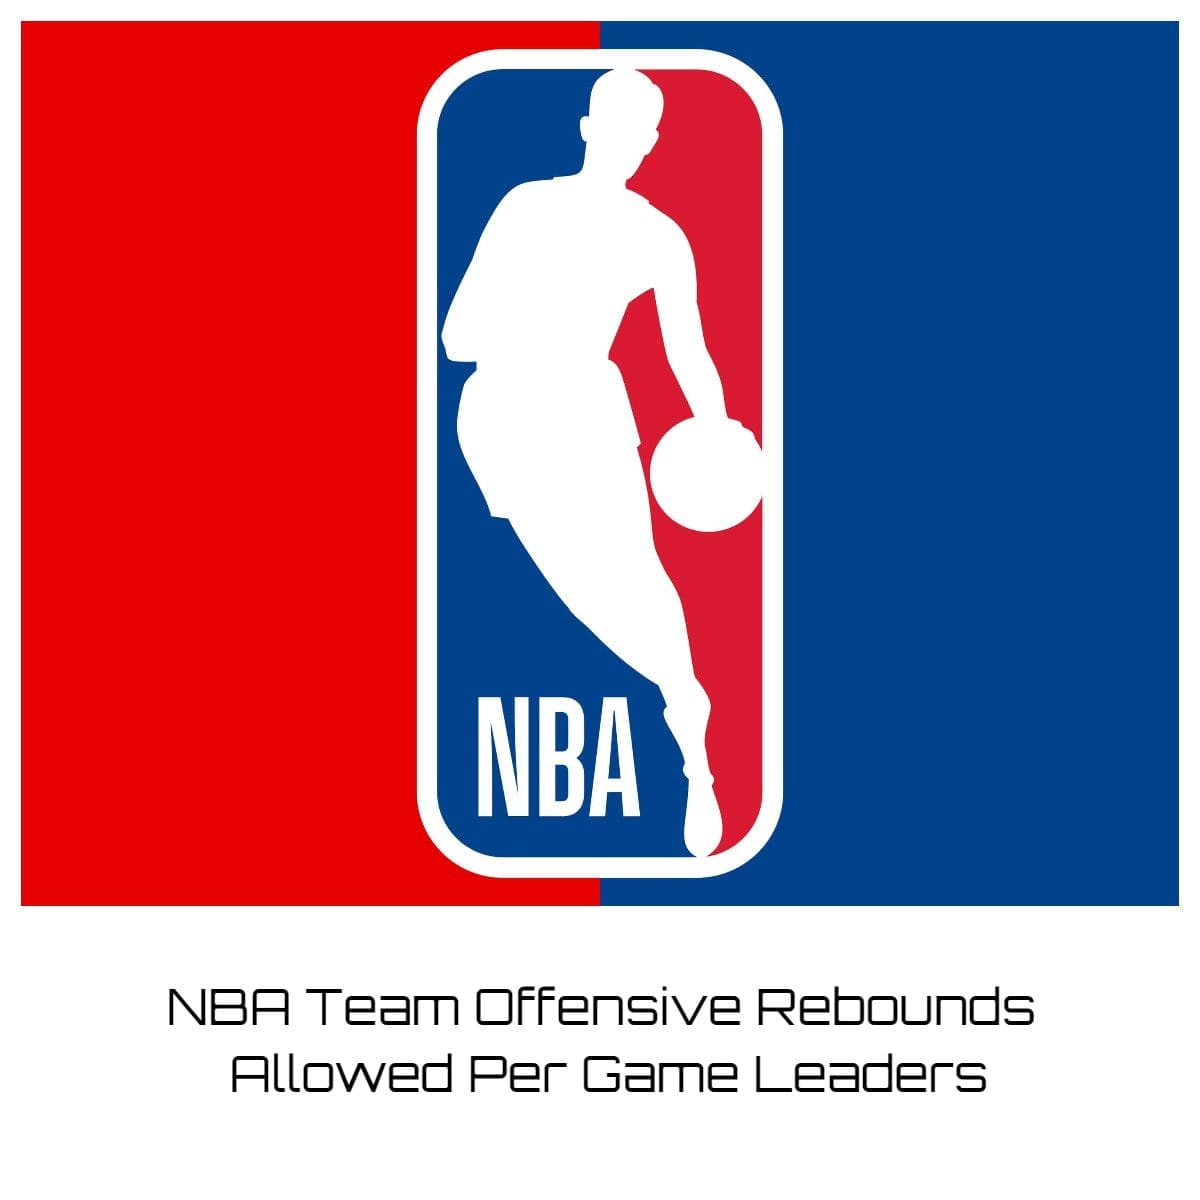 NBA Team Offensive Rebounds Allowed Per Game Leaders